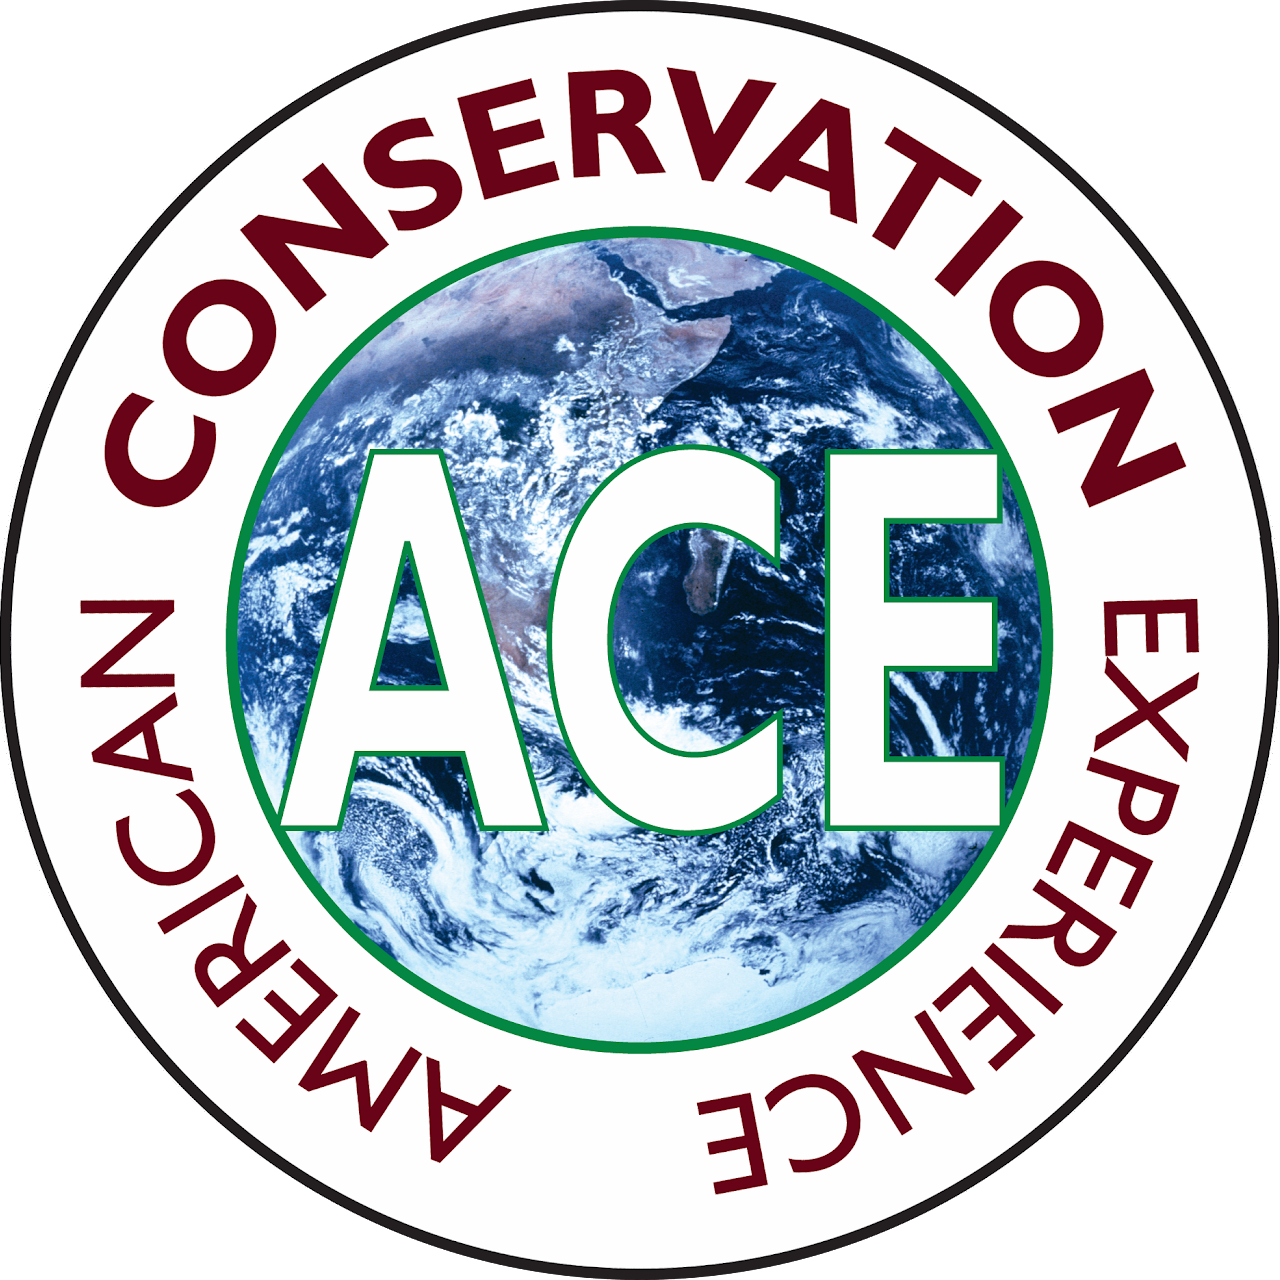 Backcountry Conservation Crew